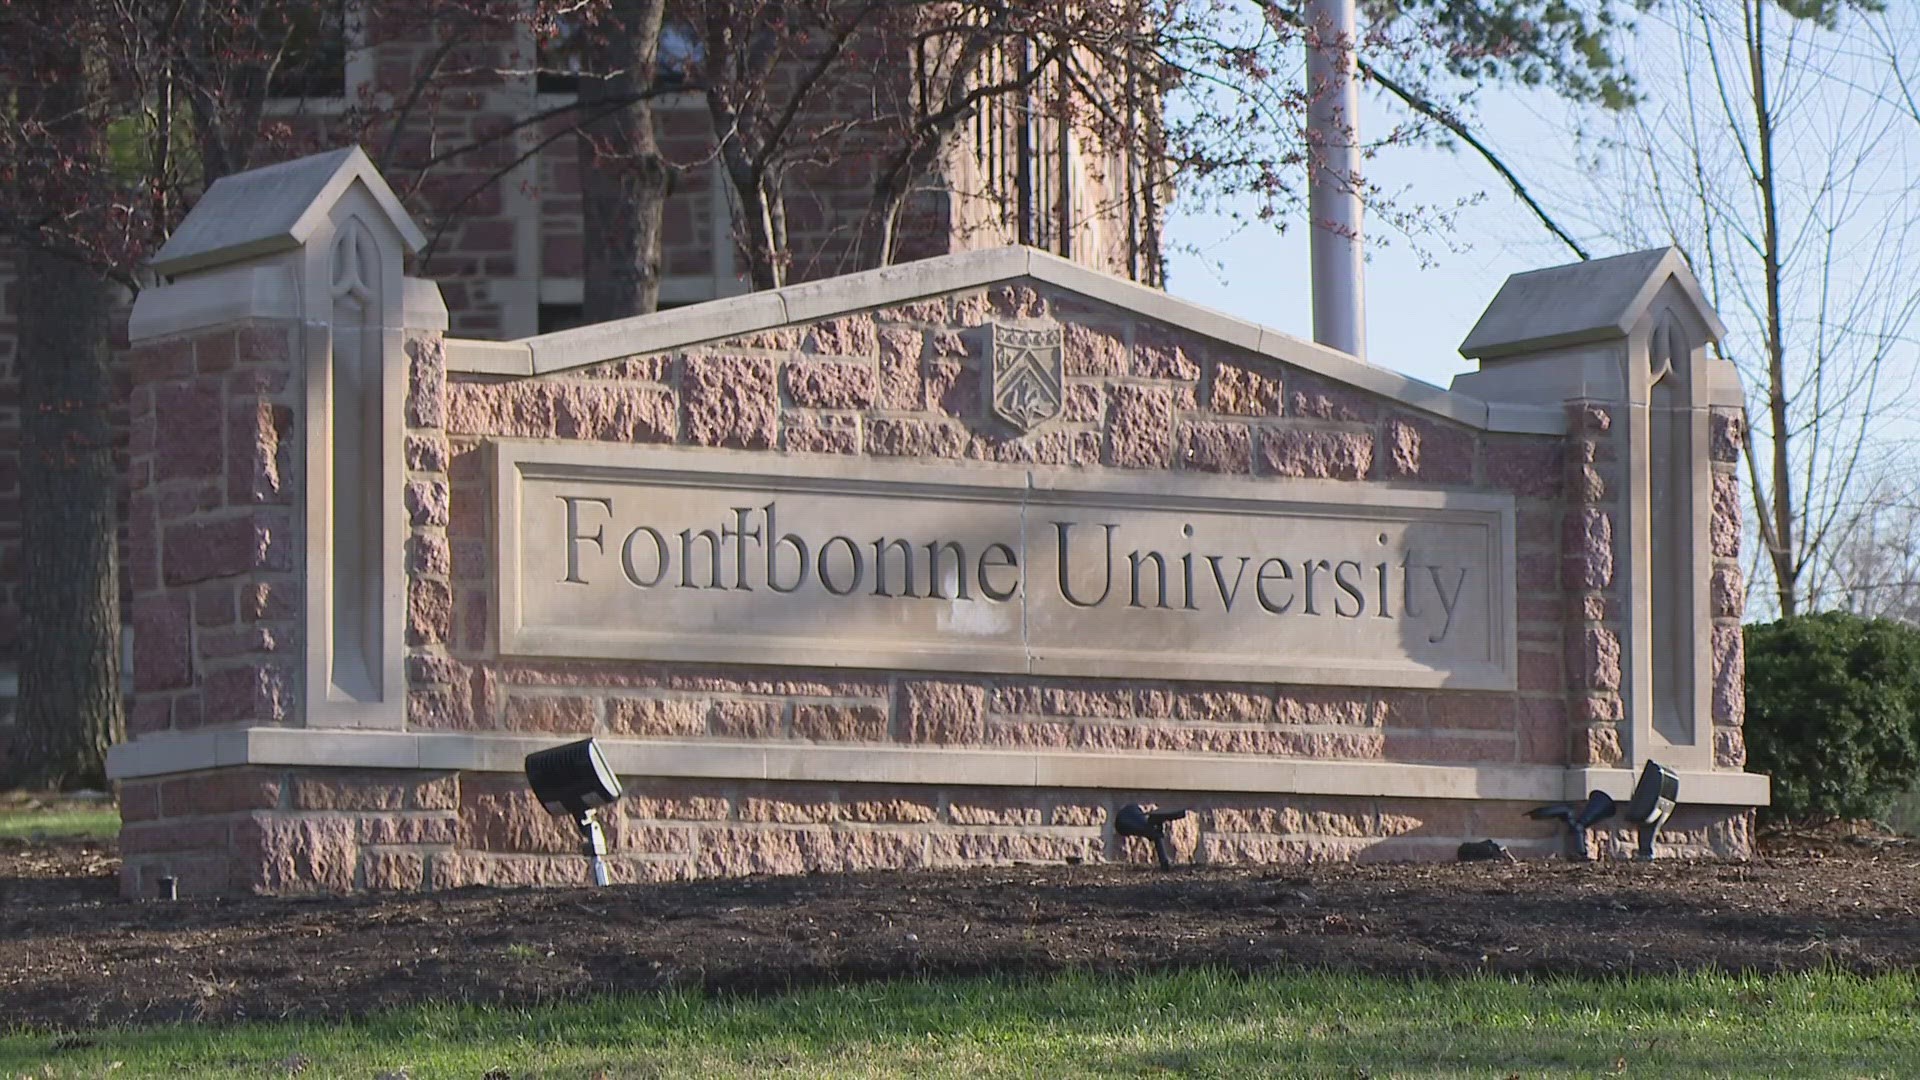 After more than 100 years, Fontbonne University will close its doors in 2025. The decision was made after years of dwindling enrollment and financial hardship.